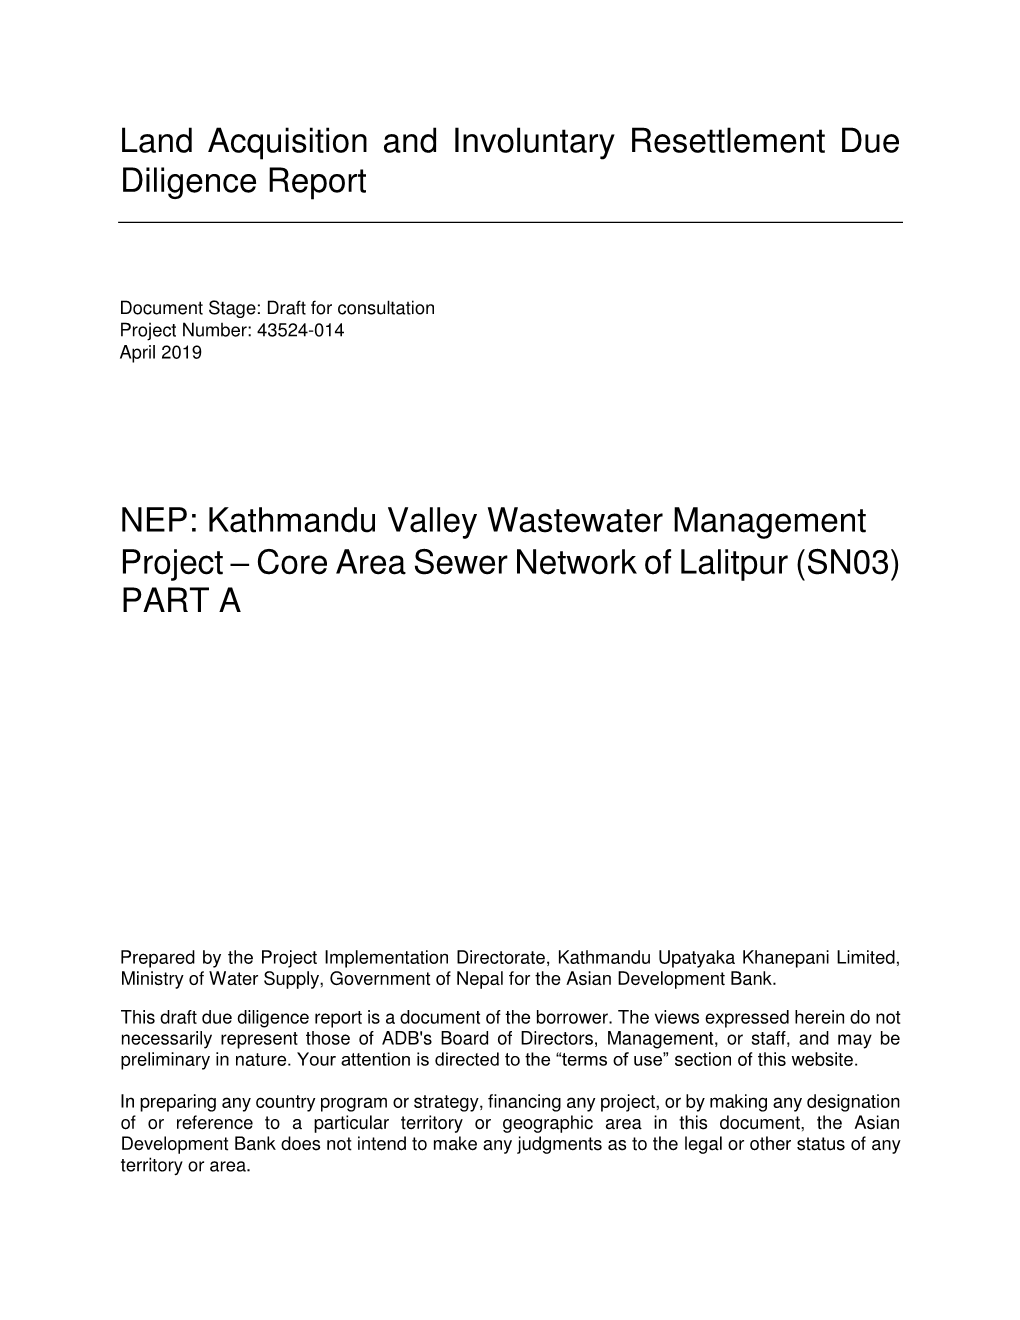 Kathmandu Valley Wastewater Management Project – Core Area Sewer Network of Lalitpur (SN03) PART A